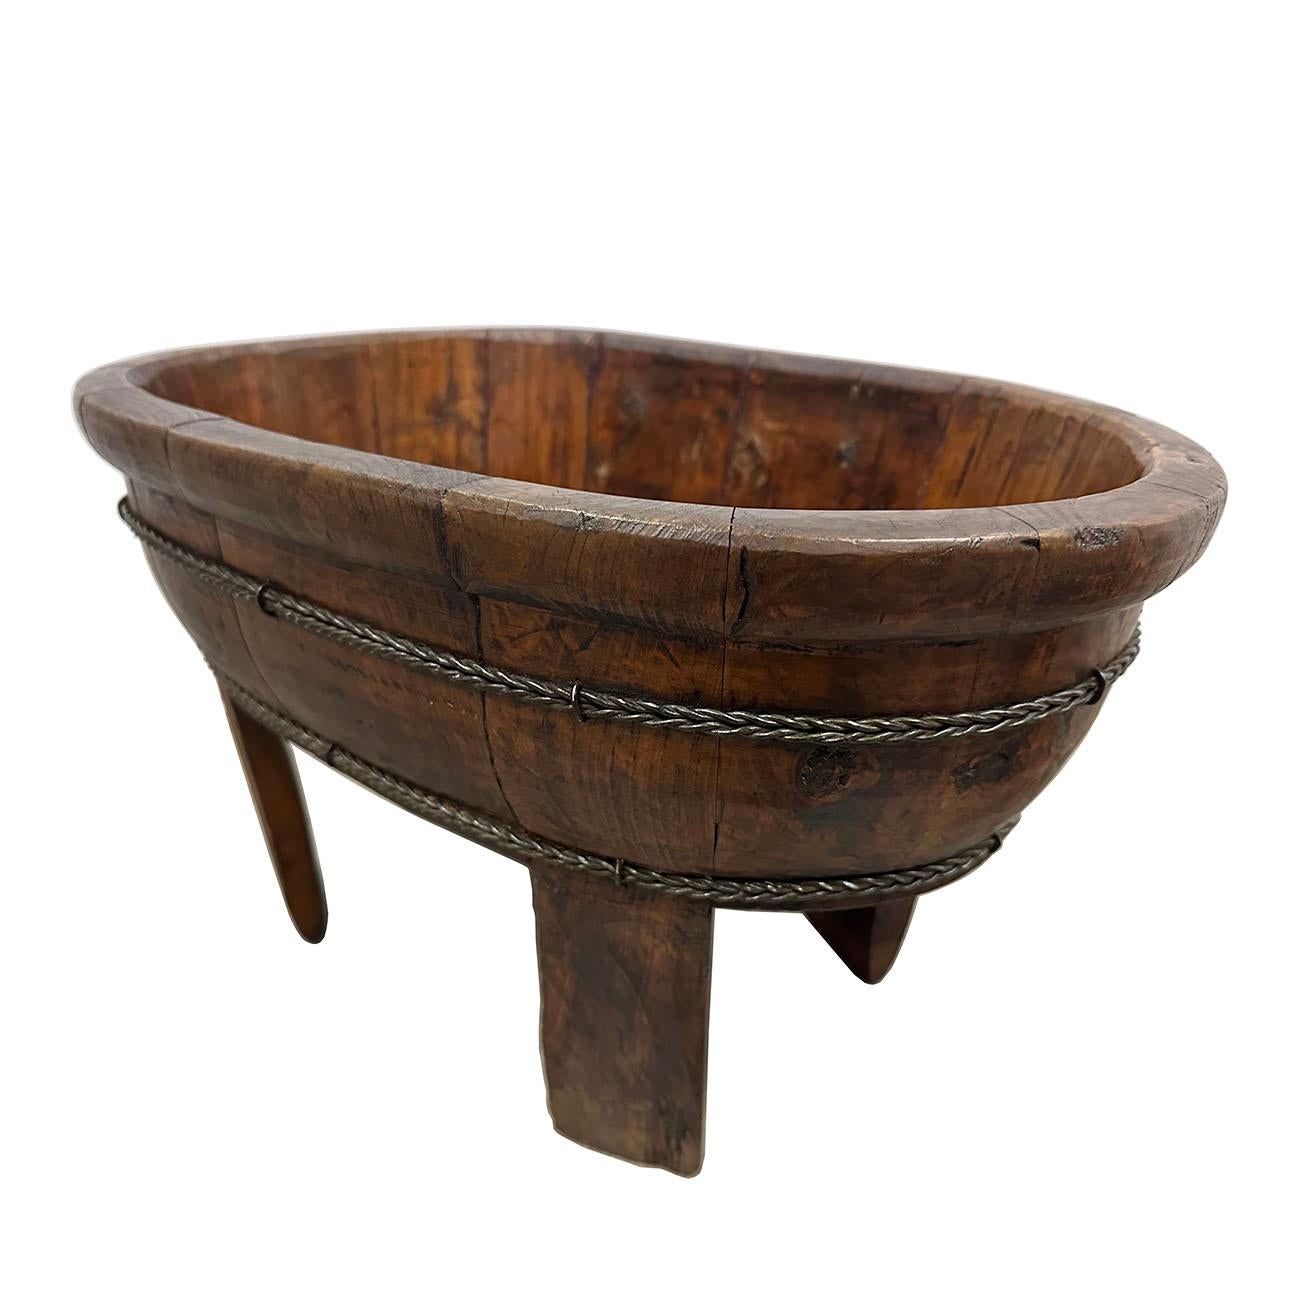 Up for sell is an Chinese Antique Wash Basin. If you are looking for a real Chinese antique, this is it. It's originally from China, and has over 100 years history. You can easily see from the pictures that it has some wears due to the long term